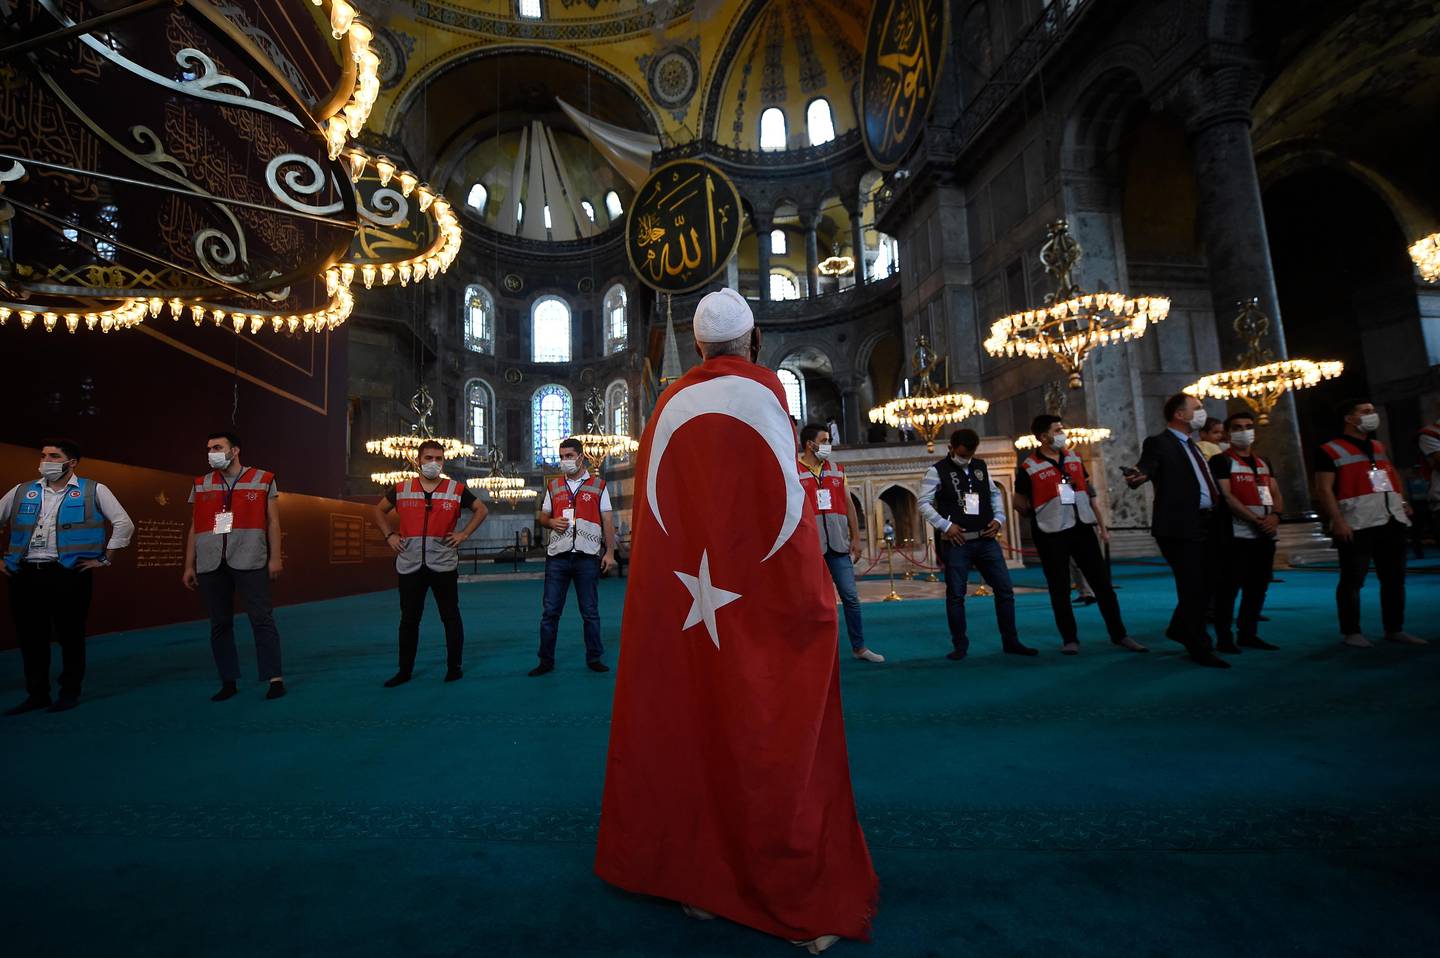 A man draped in a Turkish flag, stands as people walk inside the Byzantine-era Hagia Sophia following the inaugural Friday prayers, in the historic Sultanahmet district of Istanbul, Friday, July 24, 2020. Worshipers held the first Muslim prayers in 86 years inside the Istanbul landmark that served as one of Christendom's most significant cathedrals, a mosque and a museum before its conversion back into a Muslim place of worship. The conversion of the edifice, has led to an international outcry. (AP Photo/Yasin Akgul)